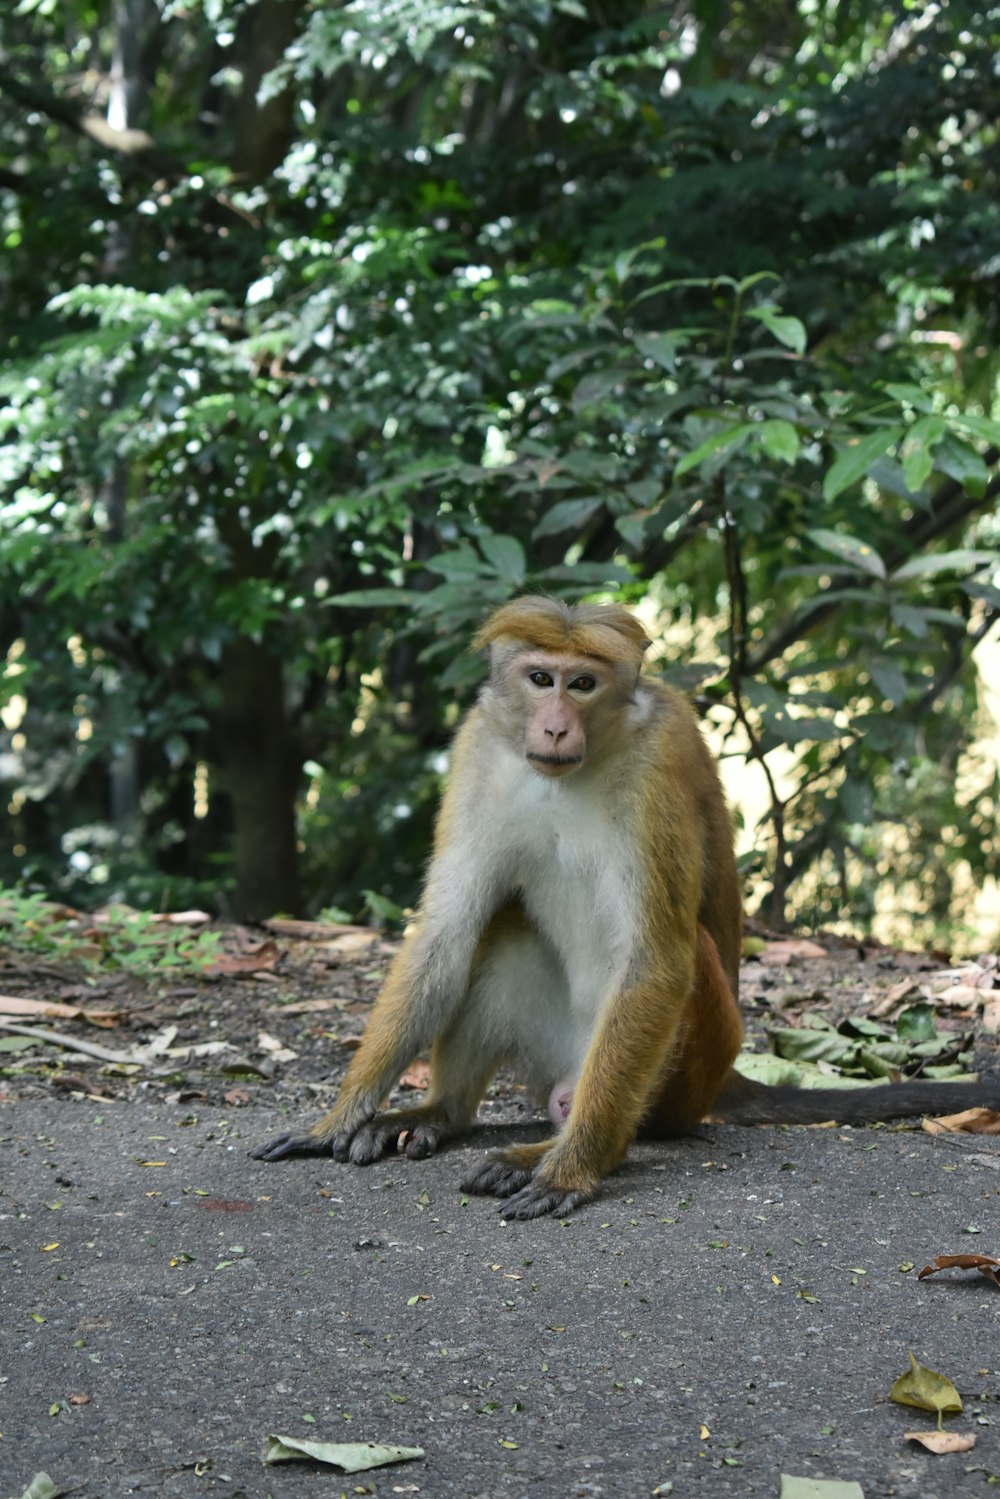 a monkey sitting on the ground in front of some trees